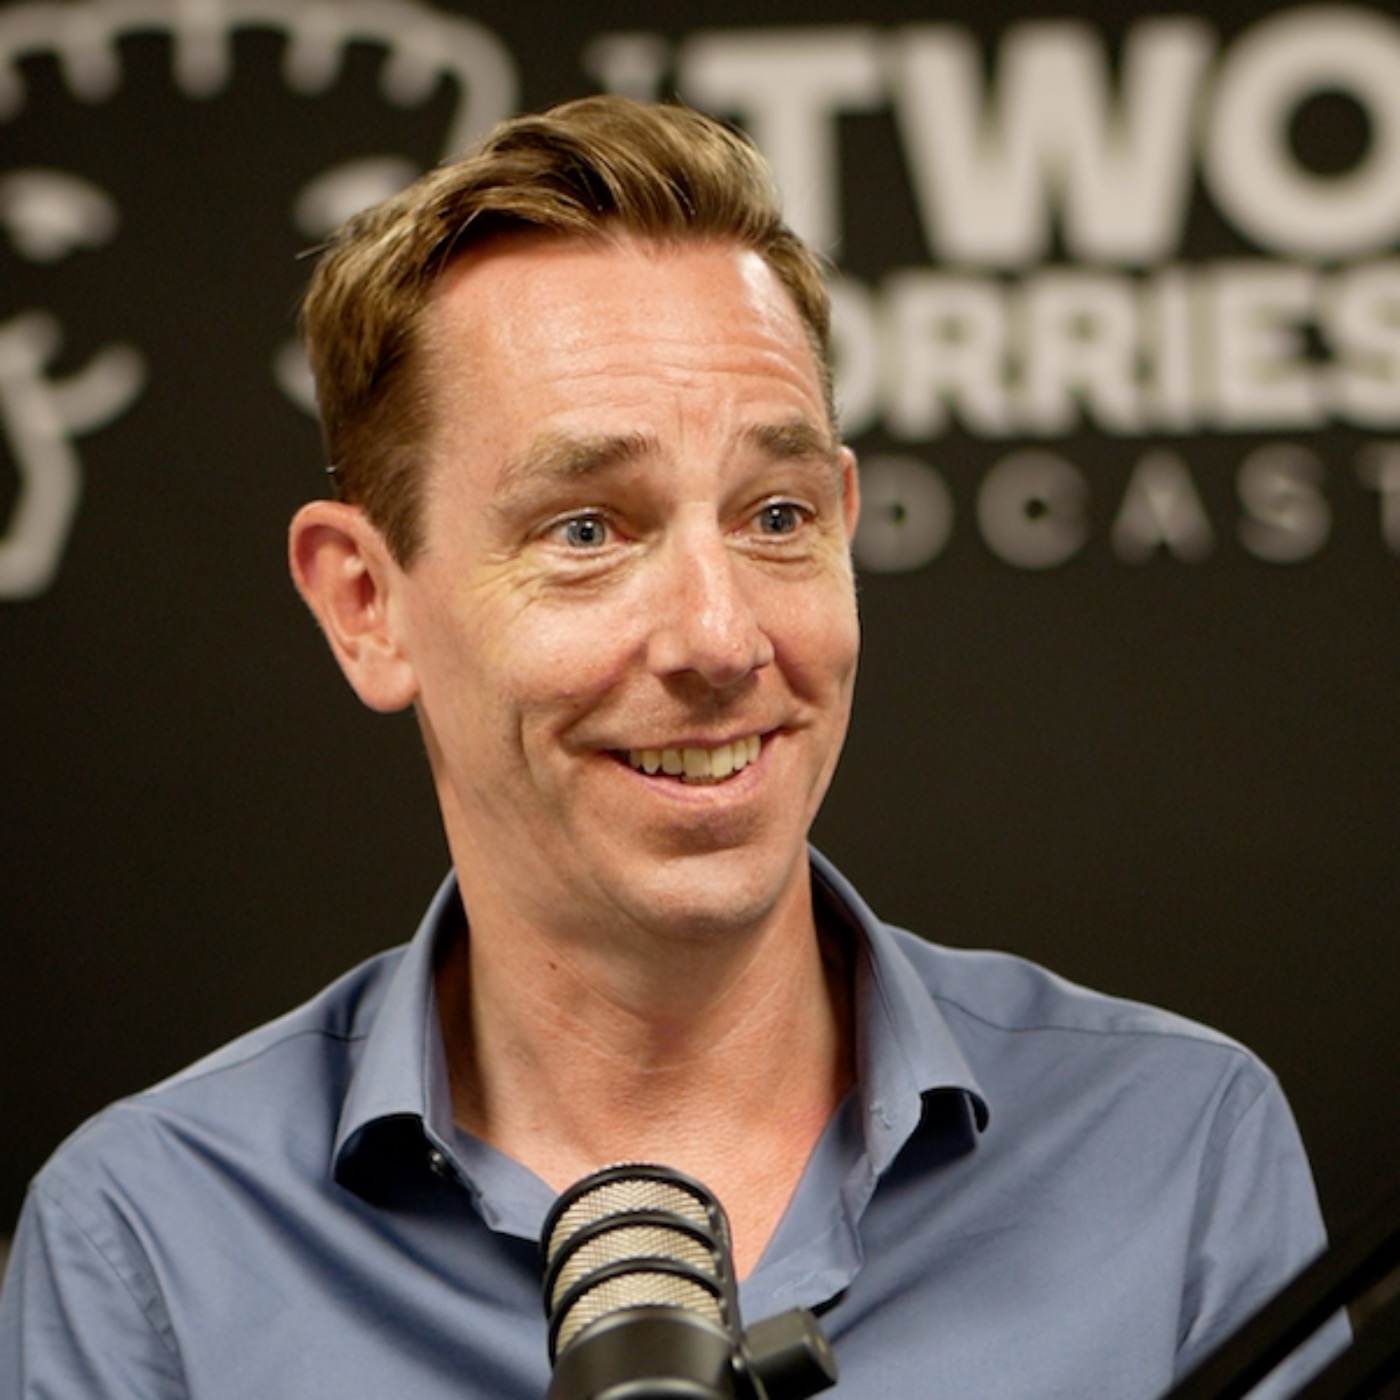 #111 Irish broadcasting legend Ryan Tubridy talks about his life, career and the Toy Show